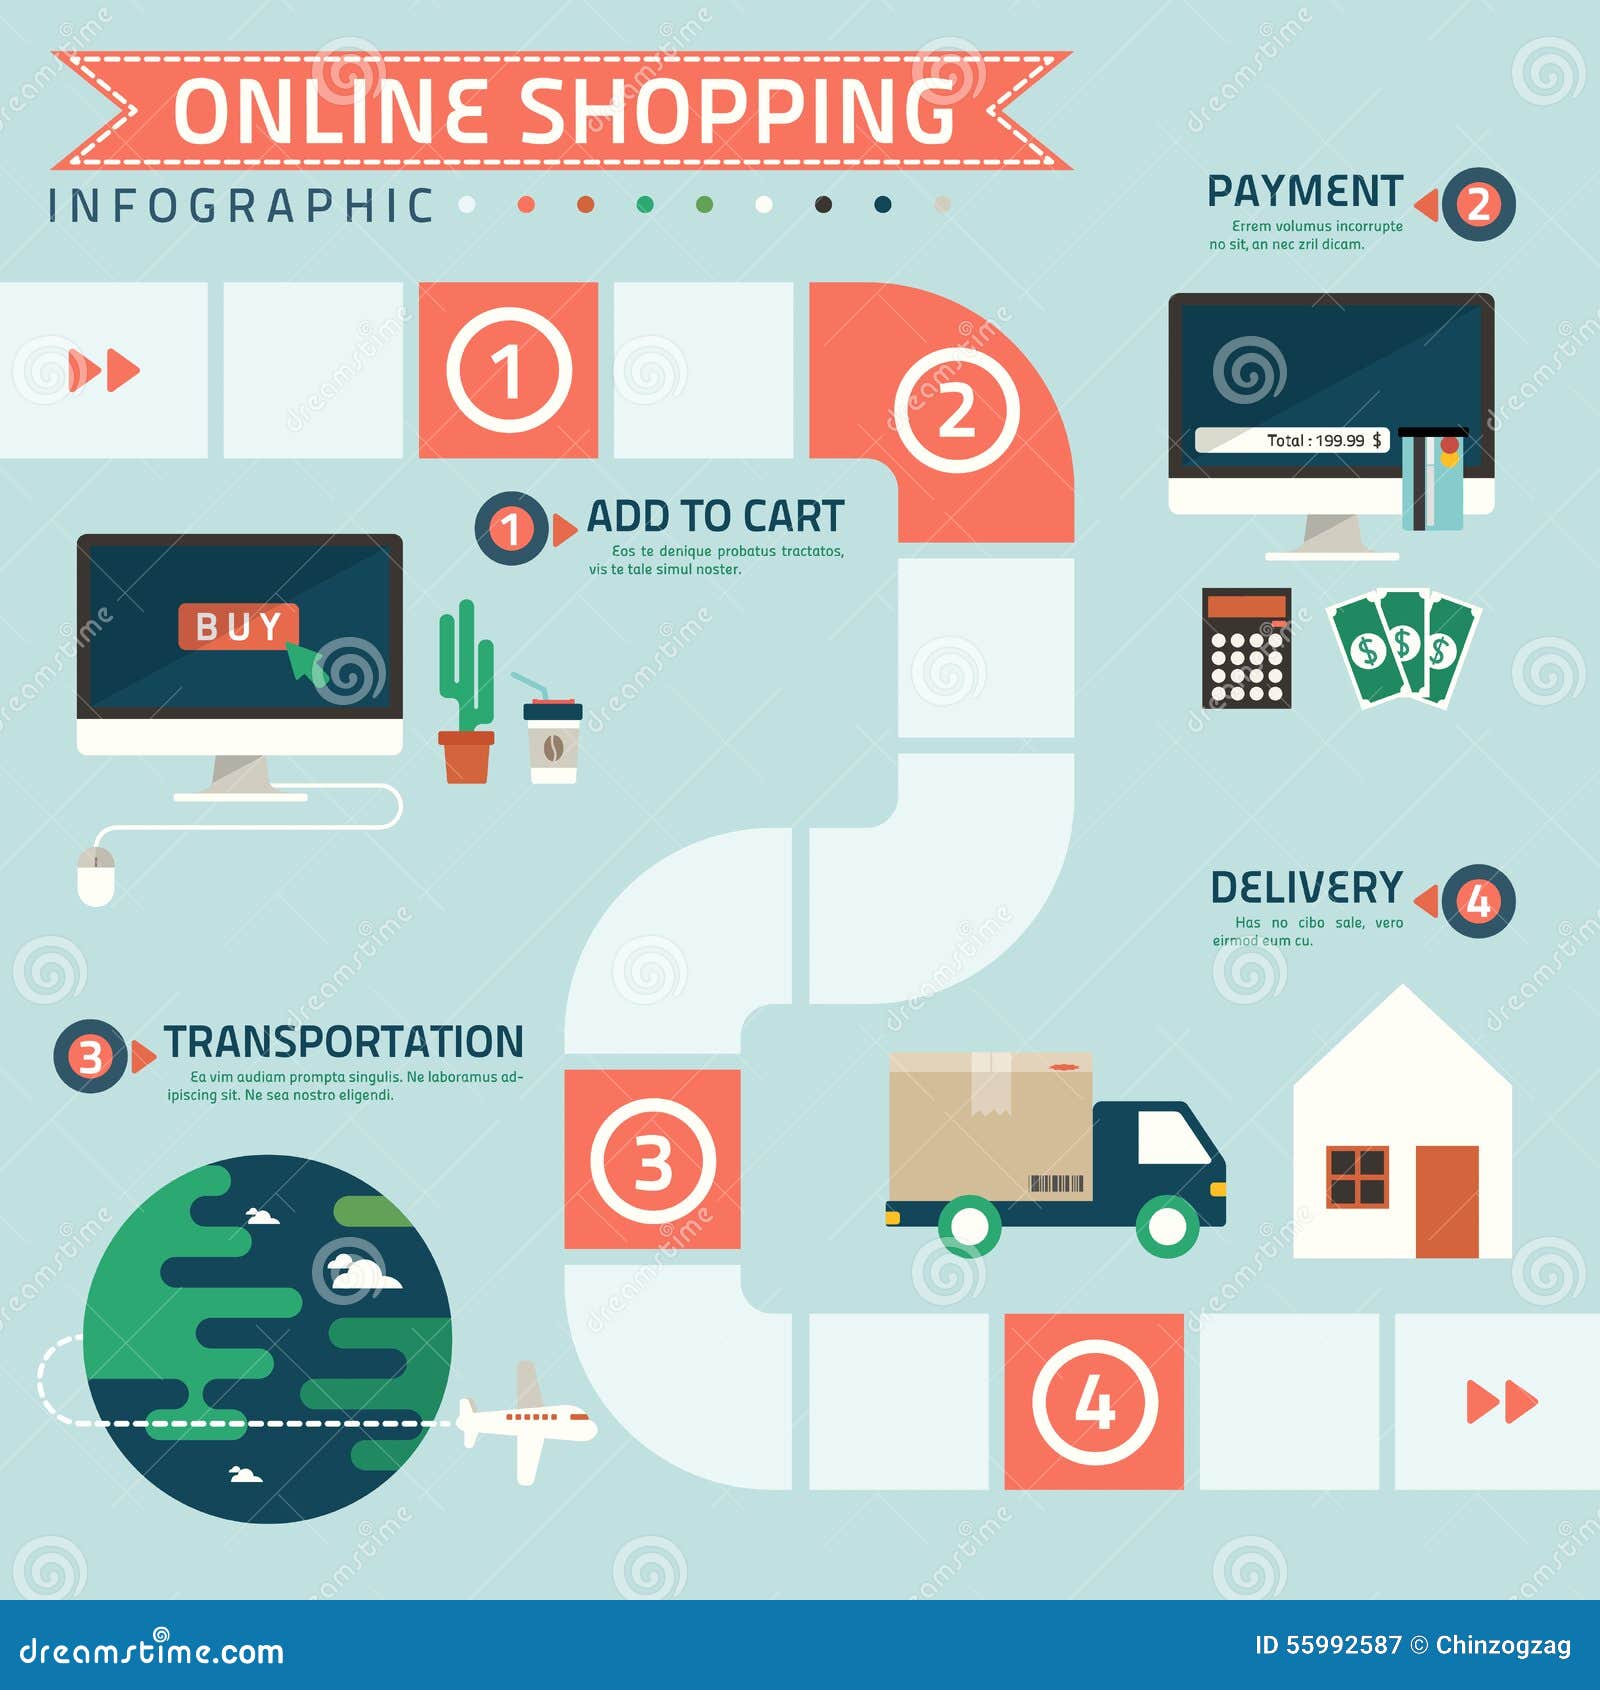 Step For Online Shopping Infographic Stock Vector - Image ...